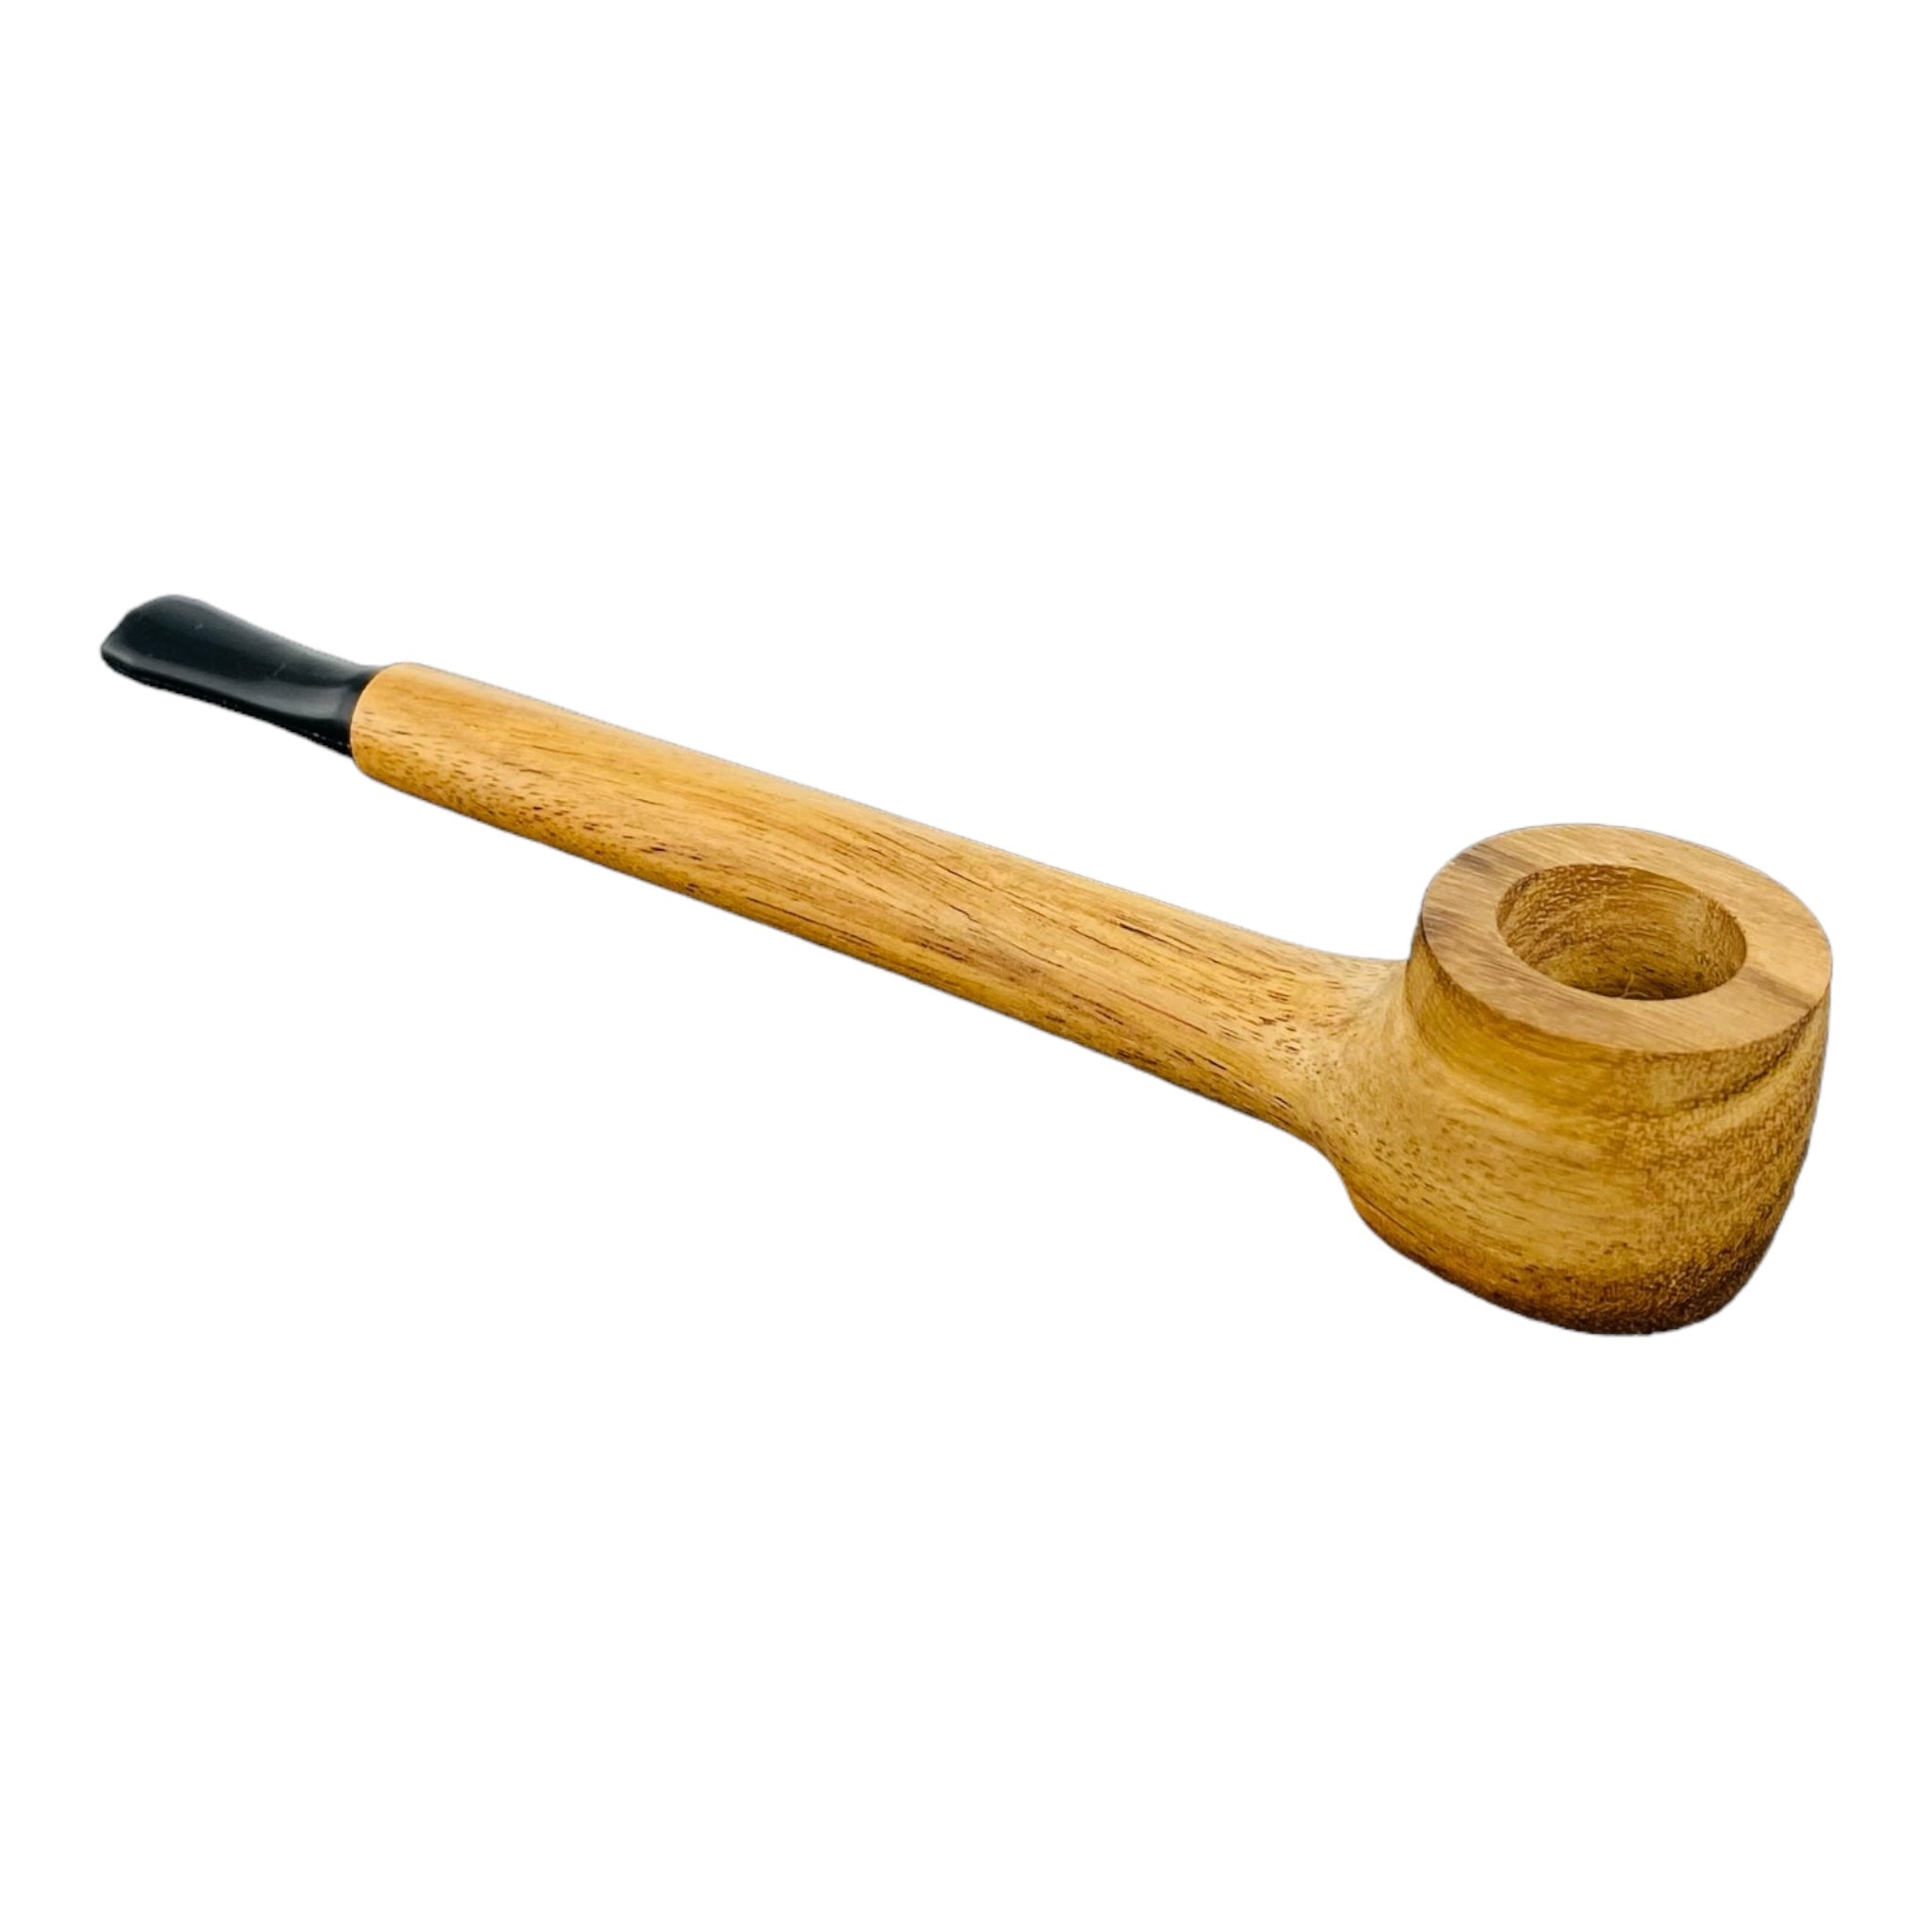 Wood Hand Pipe - Simple Skinny Long Stem Wood Pipe With Plastic Mouthp